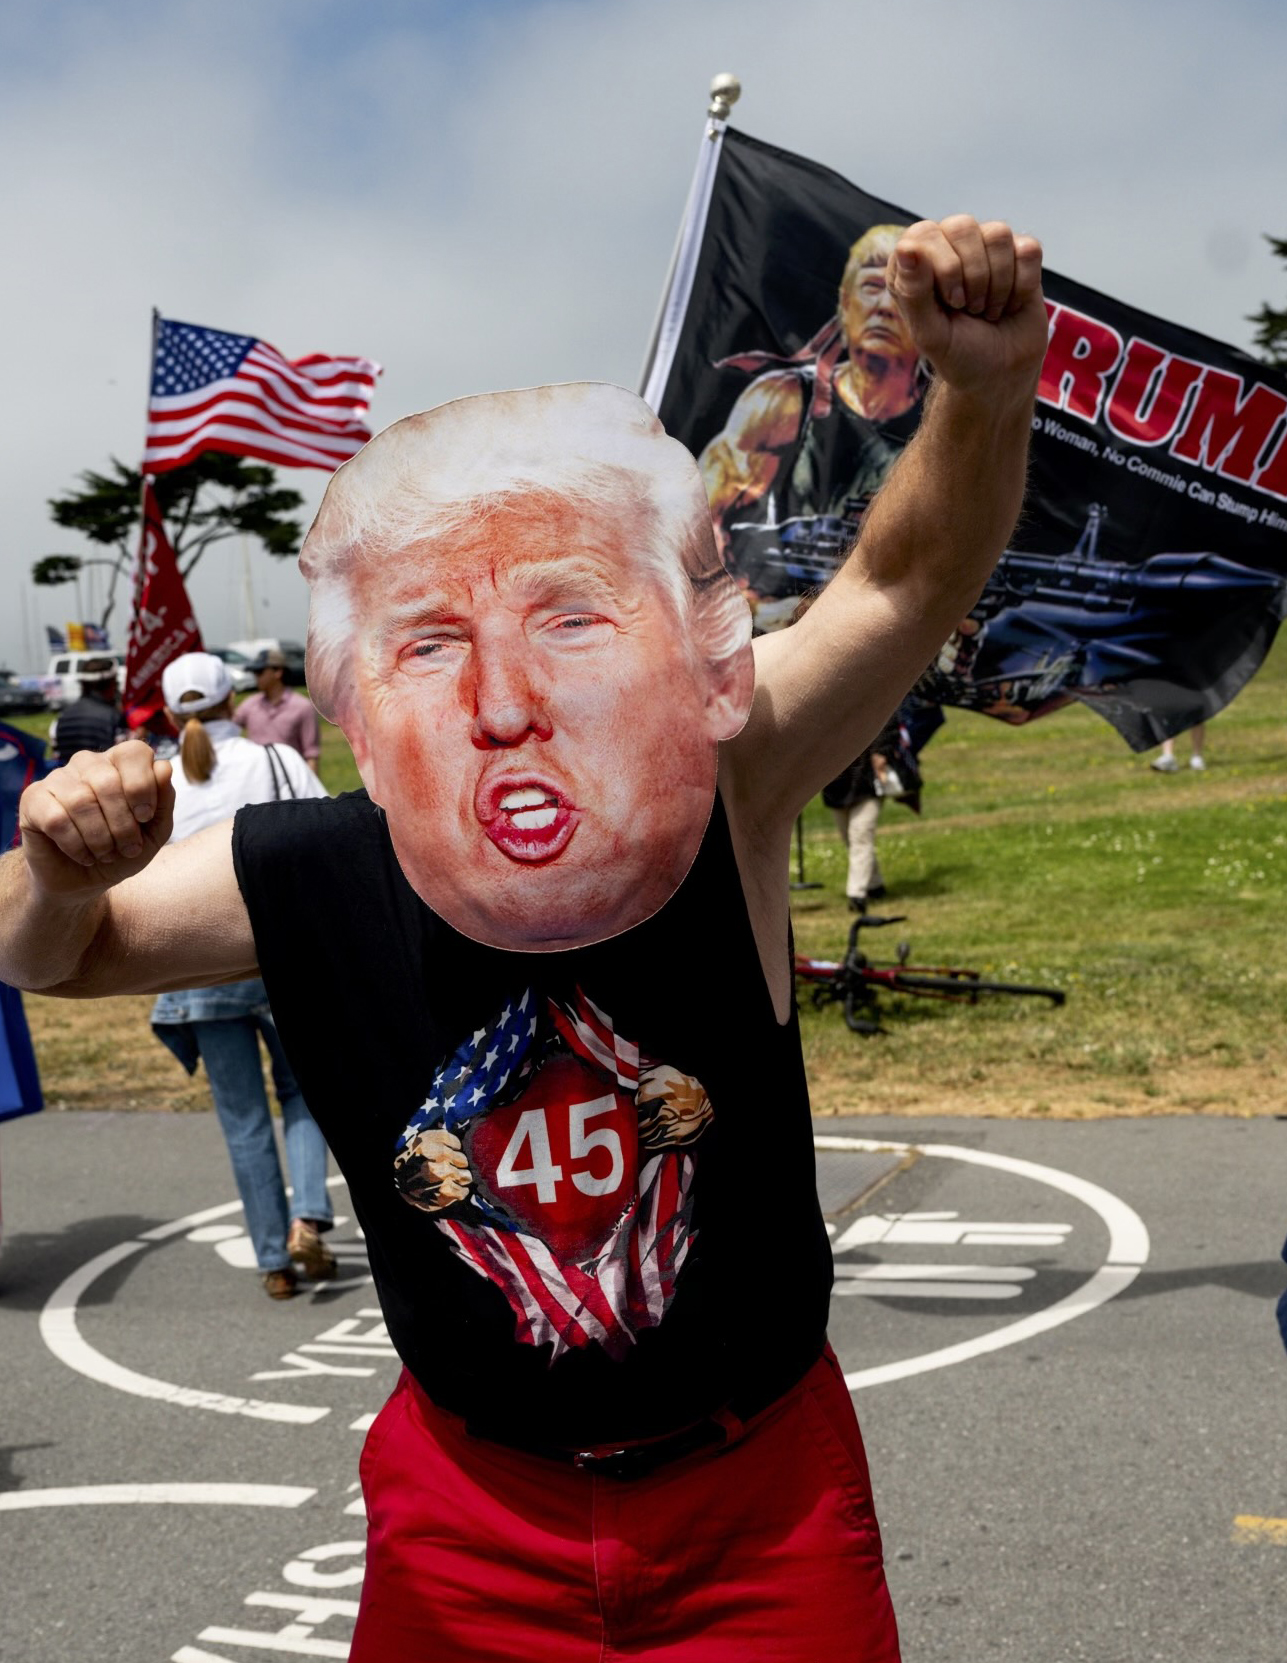 A person is wearing a mask resembling Donald Trump and a shirt depicting "45" with an American flag design. They are posing energetically, surrounded by flags in a park setting.